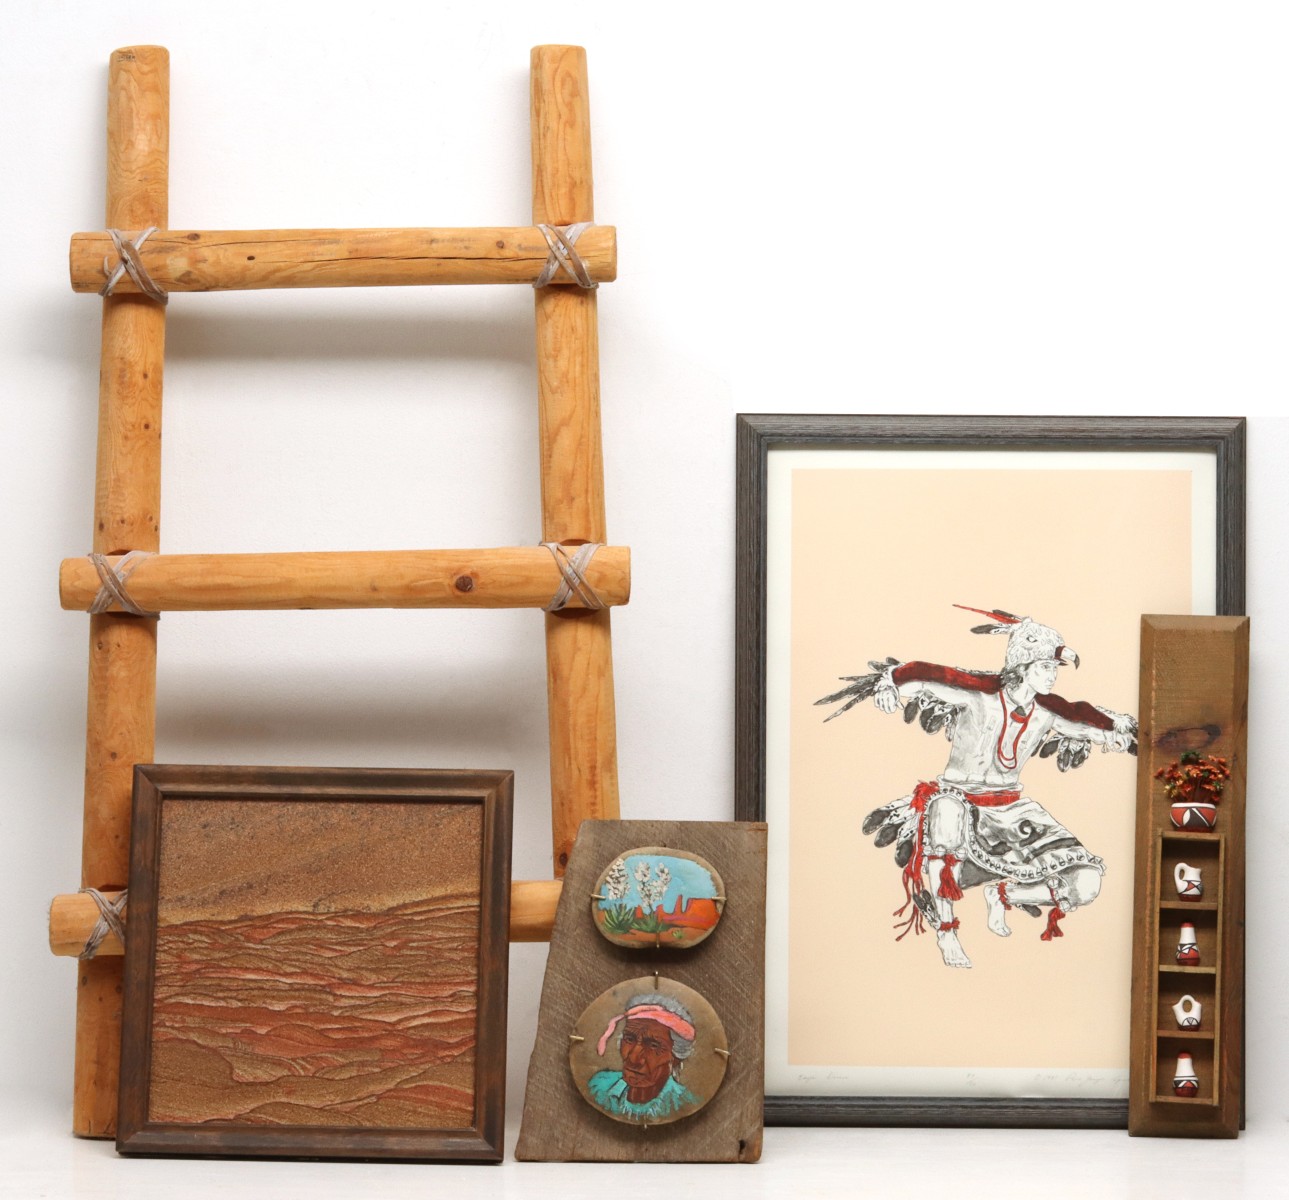 LATE 20TH C. NATIVE AMERICAN CRAFTS AND COLLECTIBLES